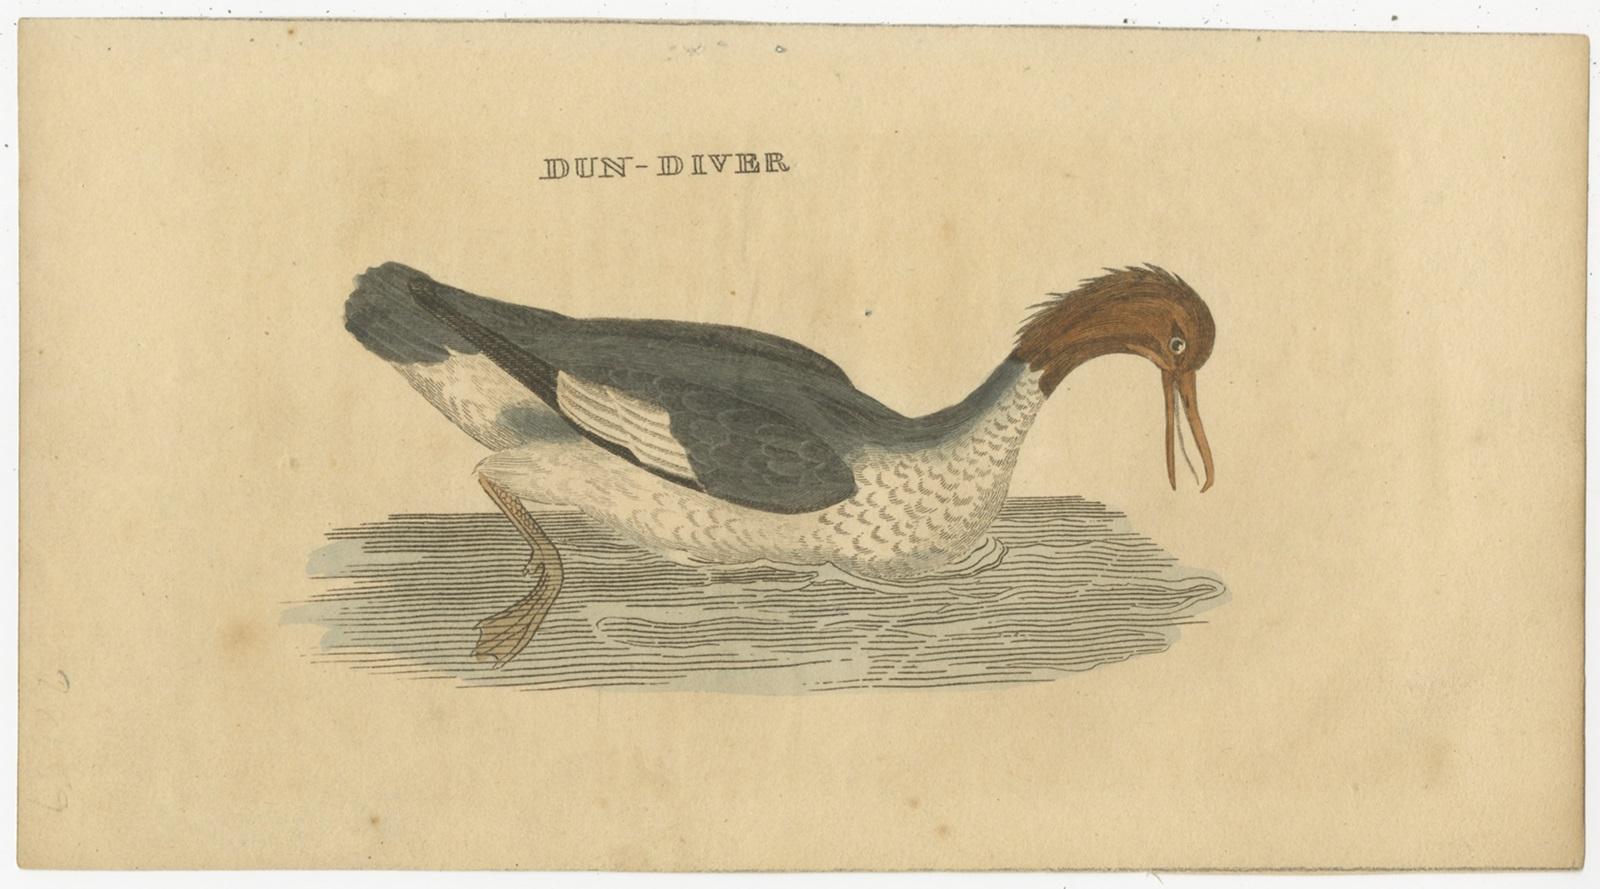 Set of four antique bird prints titled 'Green-Winged-Dove - Condor - Mino - Dun-Diver'. These bird prints originate from 'The Natural History of Birds', published 1815.